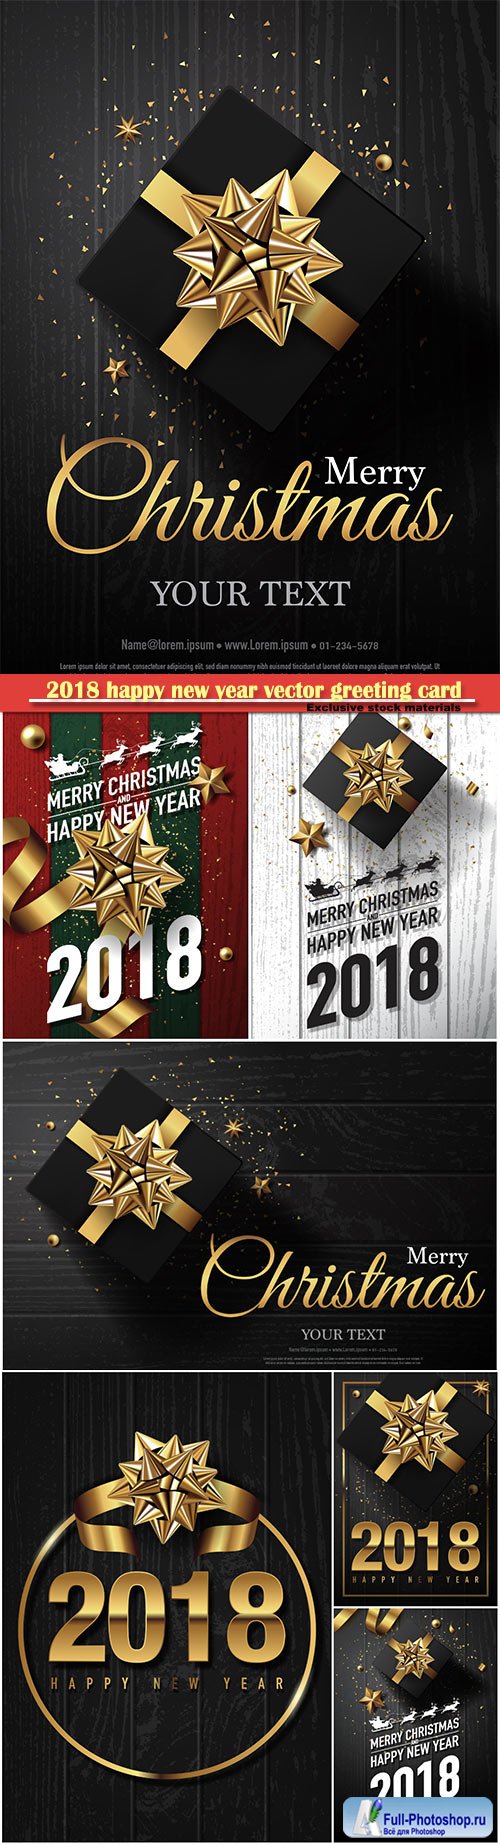 2018 happy new year vector greeting card